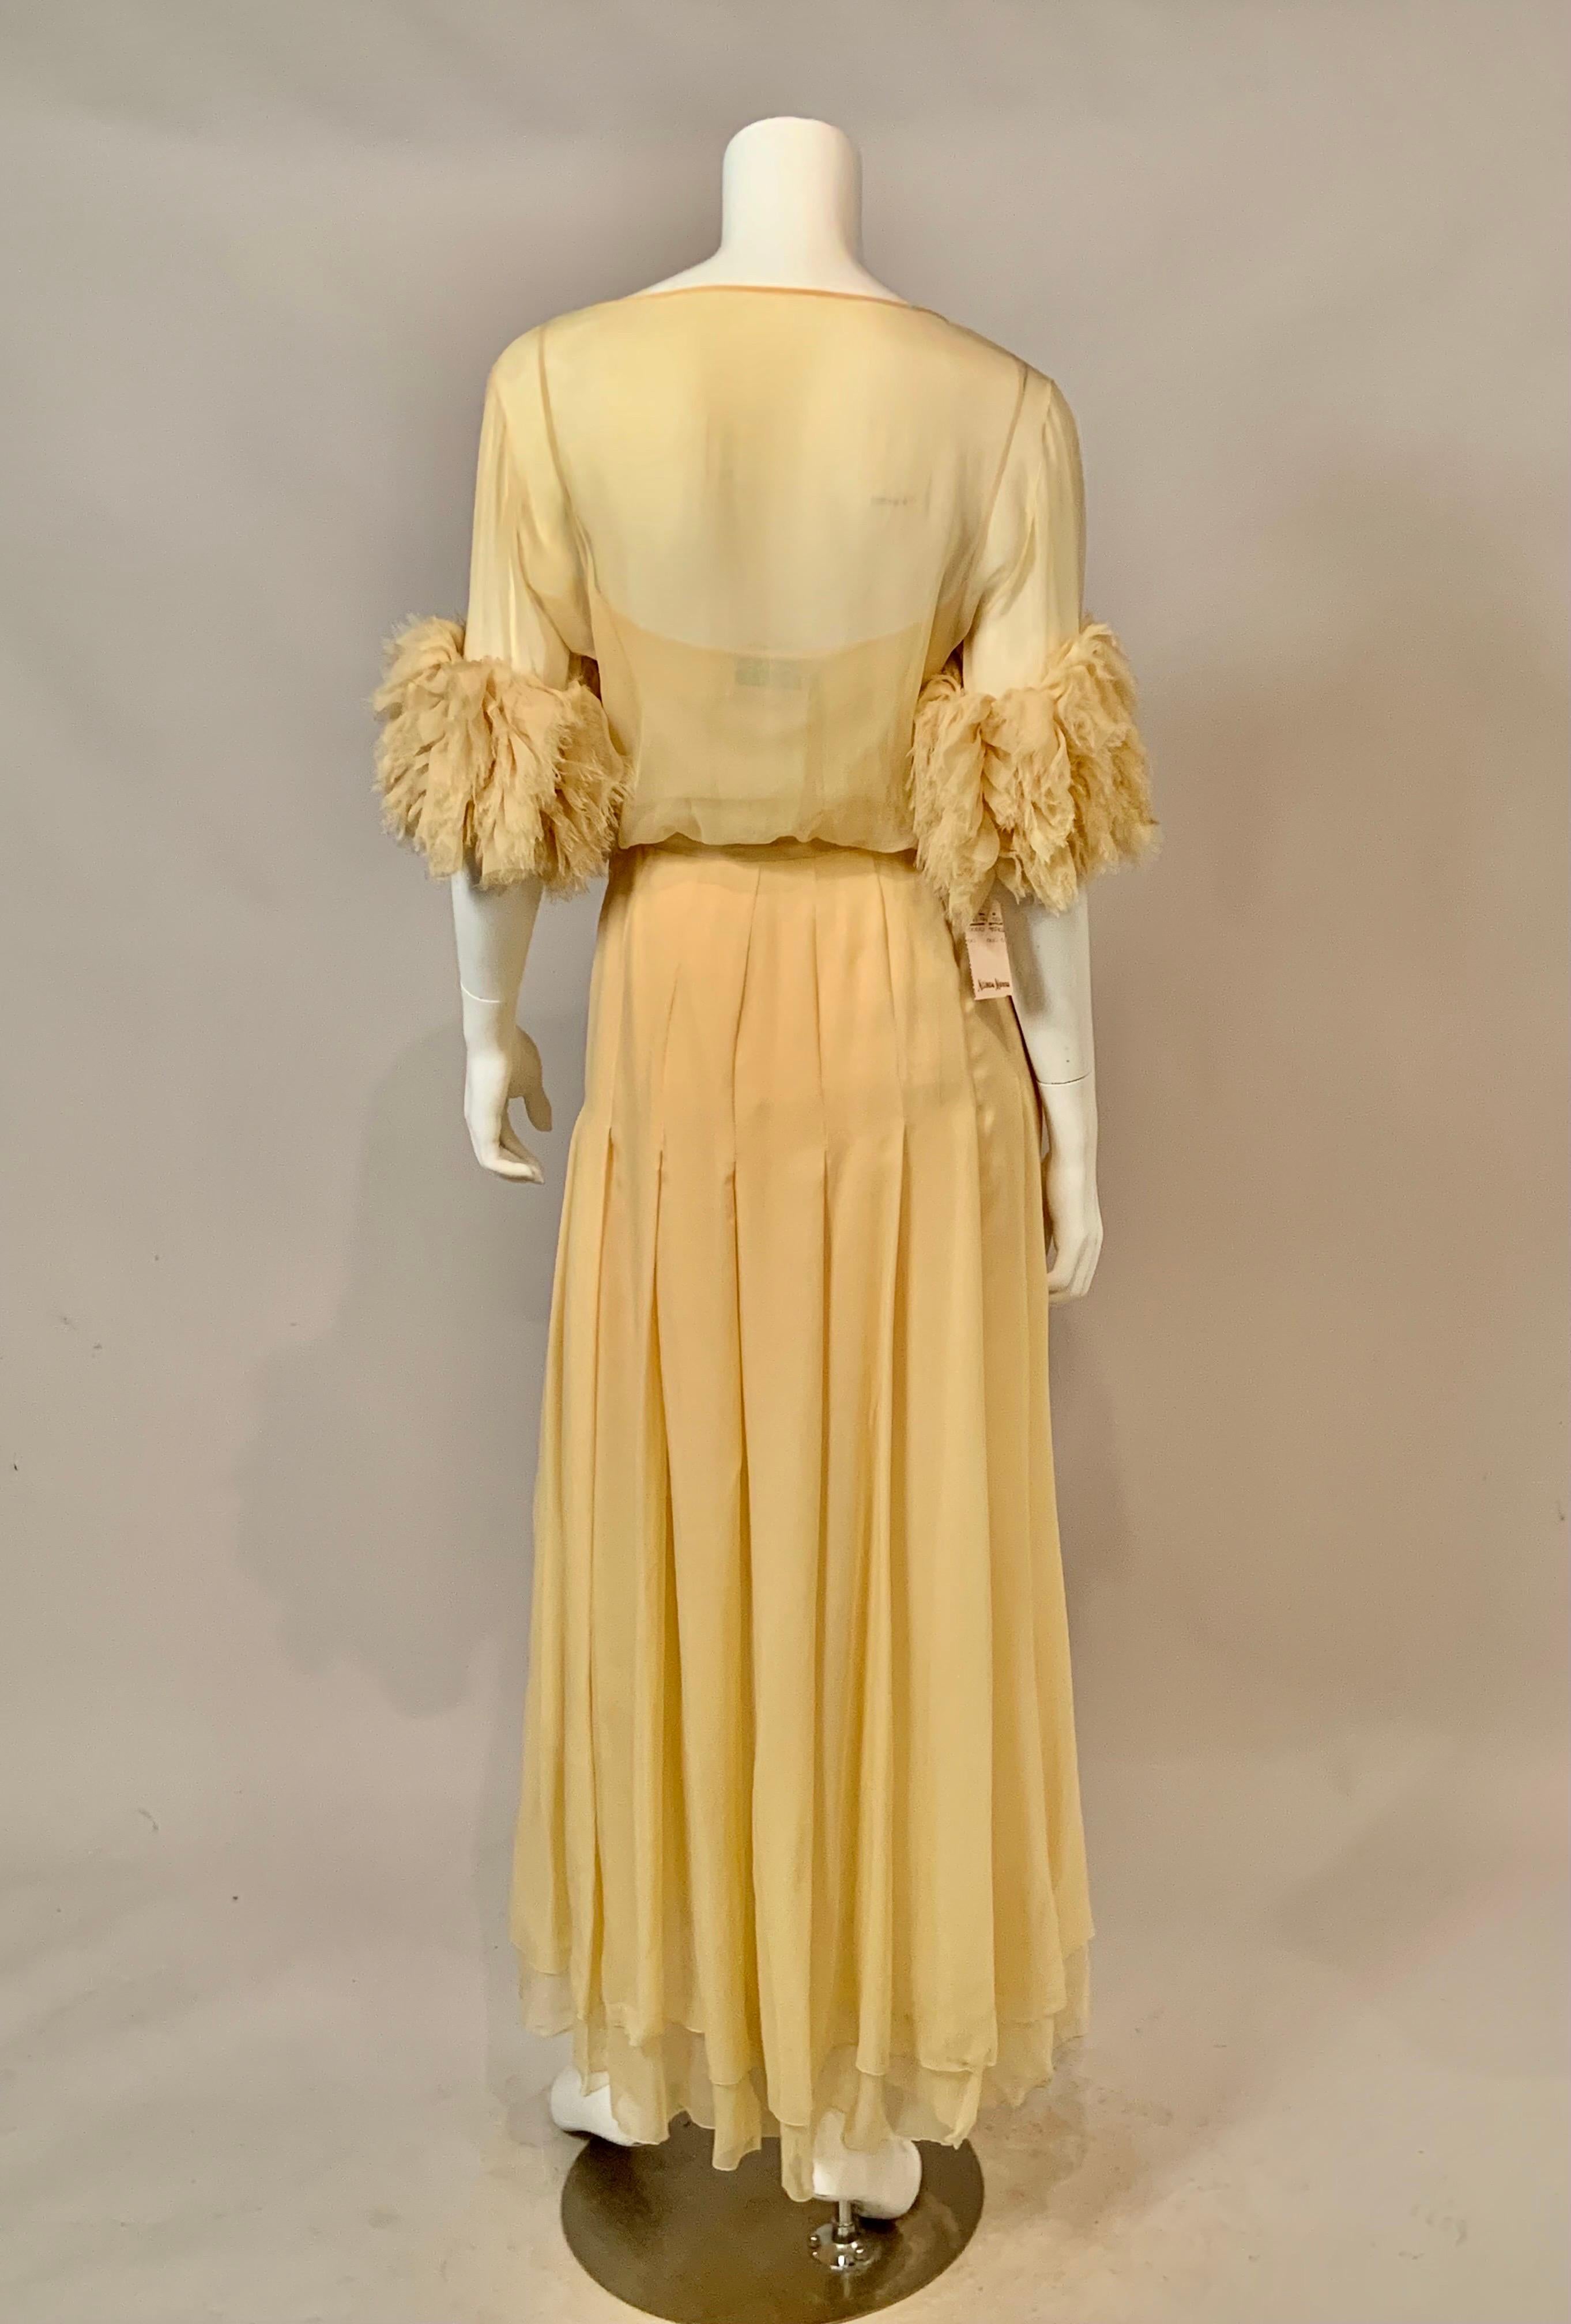 1984 Chanel by Karl Lagerfeld Butter Yellow Silk Chiffon Evening Gown Never Worn 6